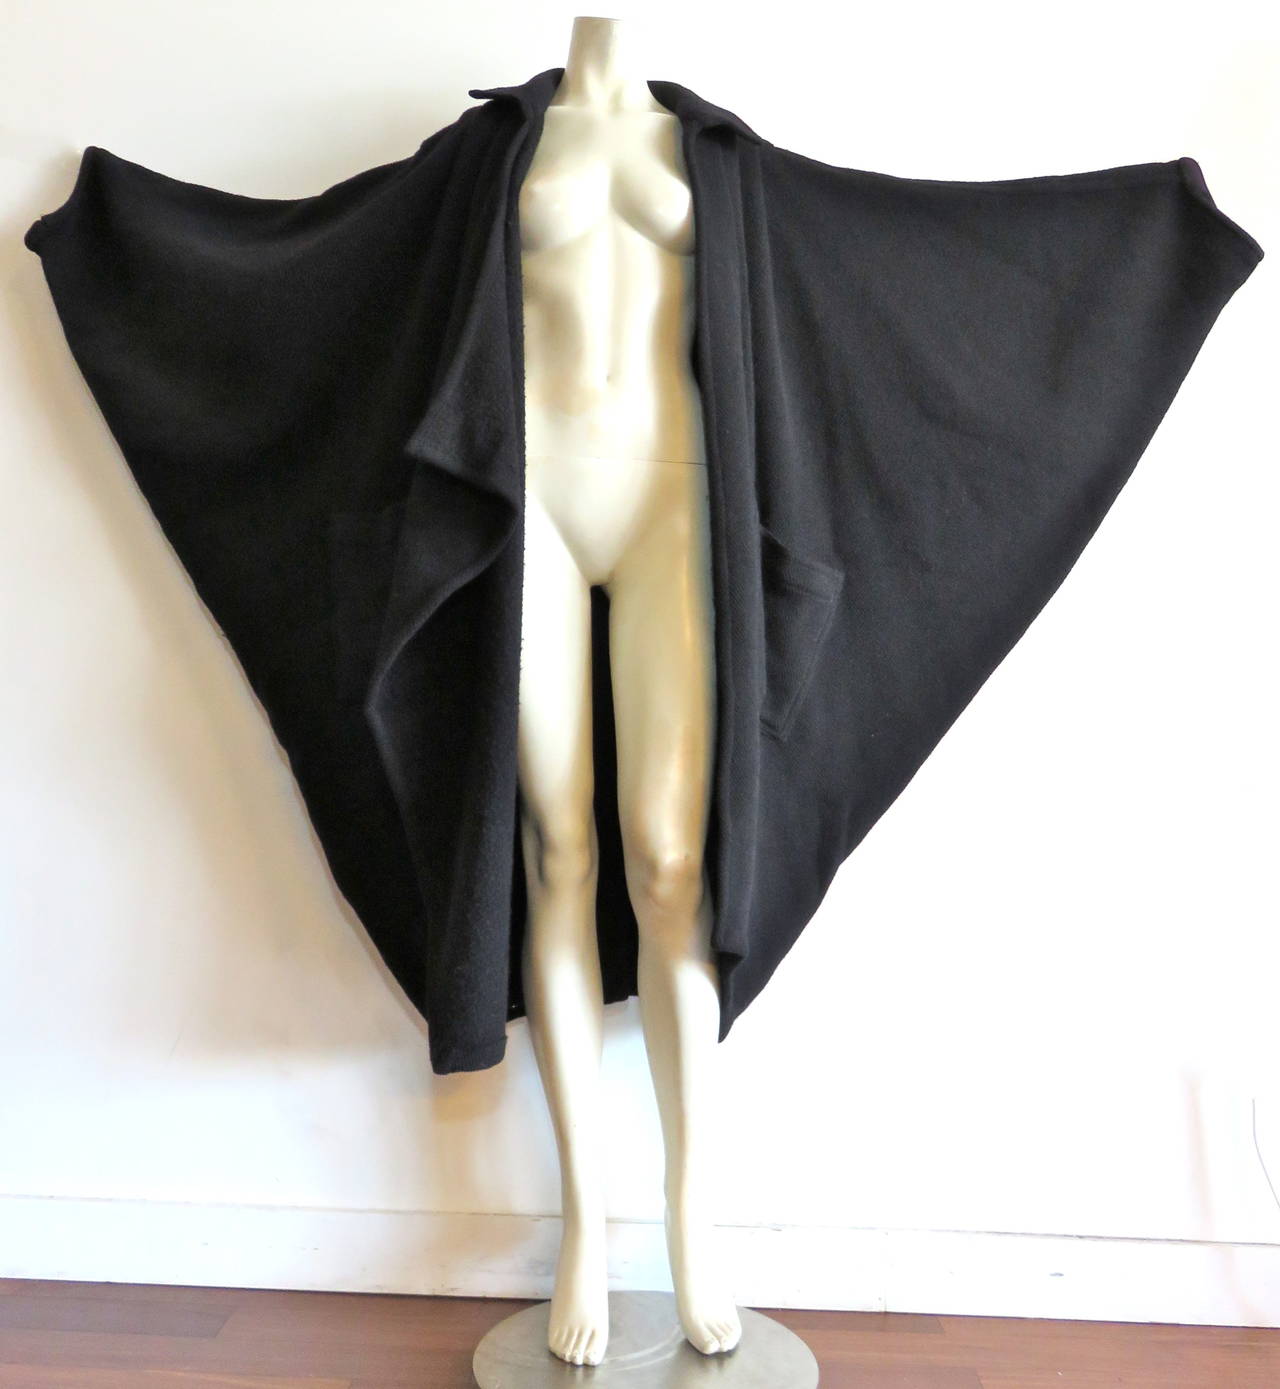 1976 ISSEY MIYAKE Oversized batwing cocoon coat In Excellent Condition For Sale In Newport Beach, CA